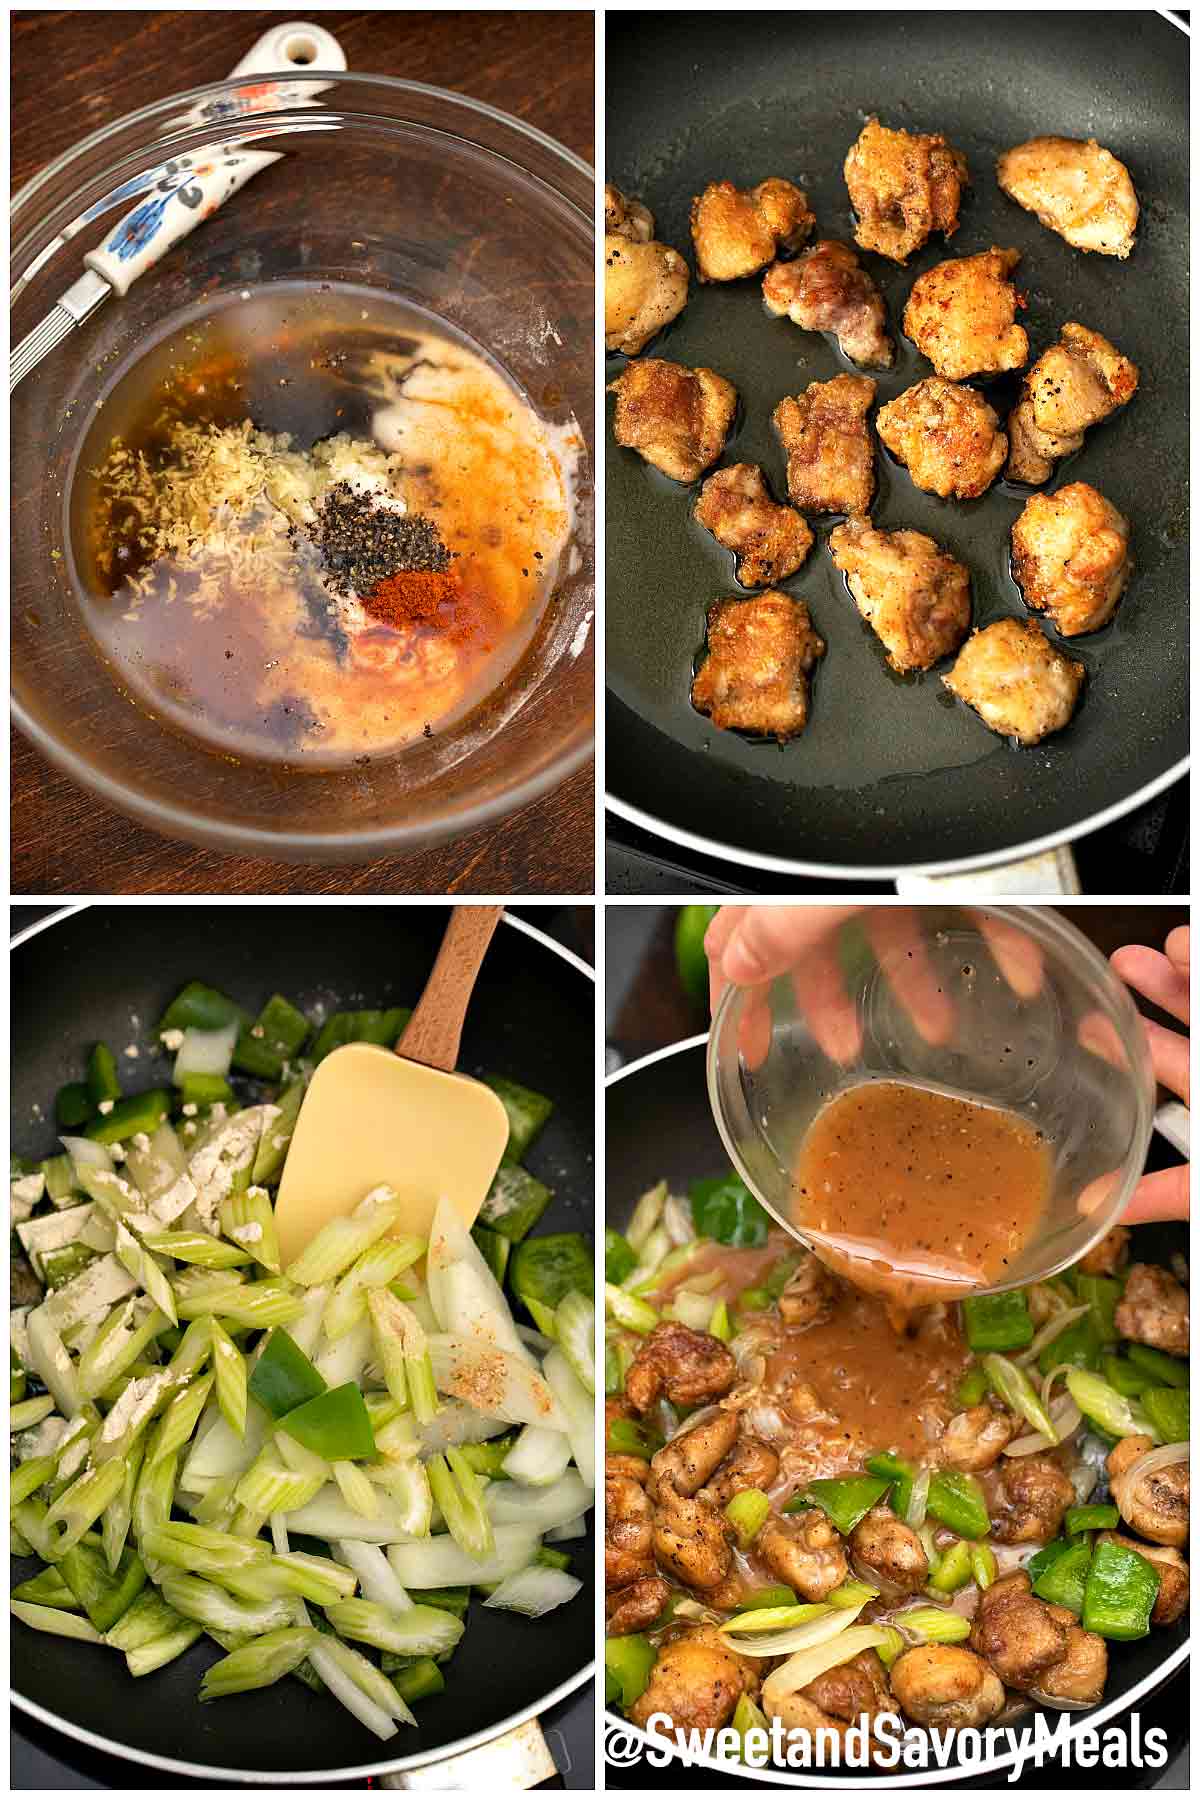 Panda Express Black Pepper Chicken [Video] - Sweet and Savory Meals